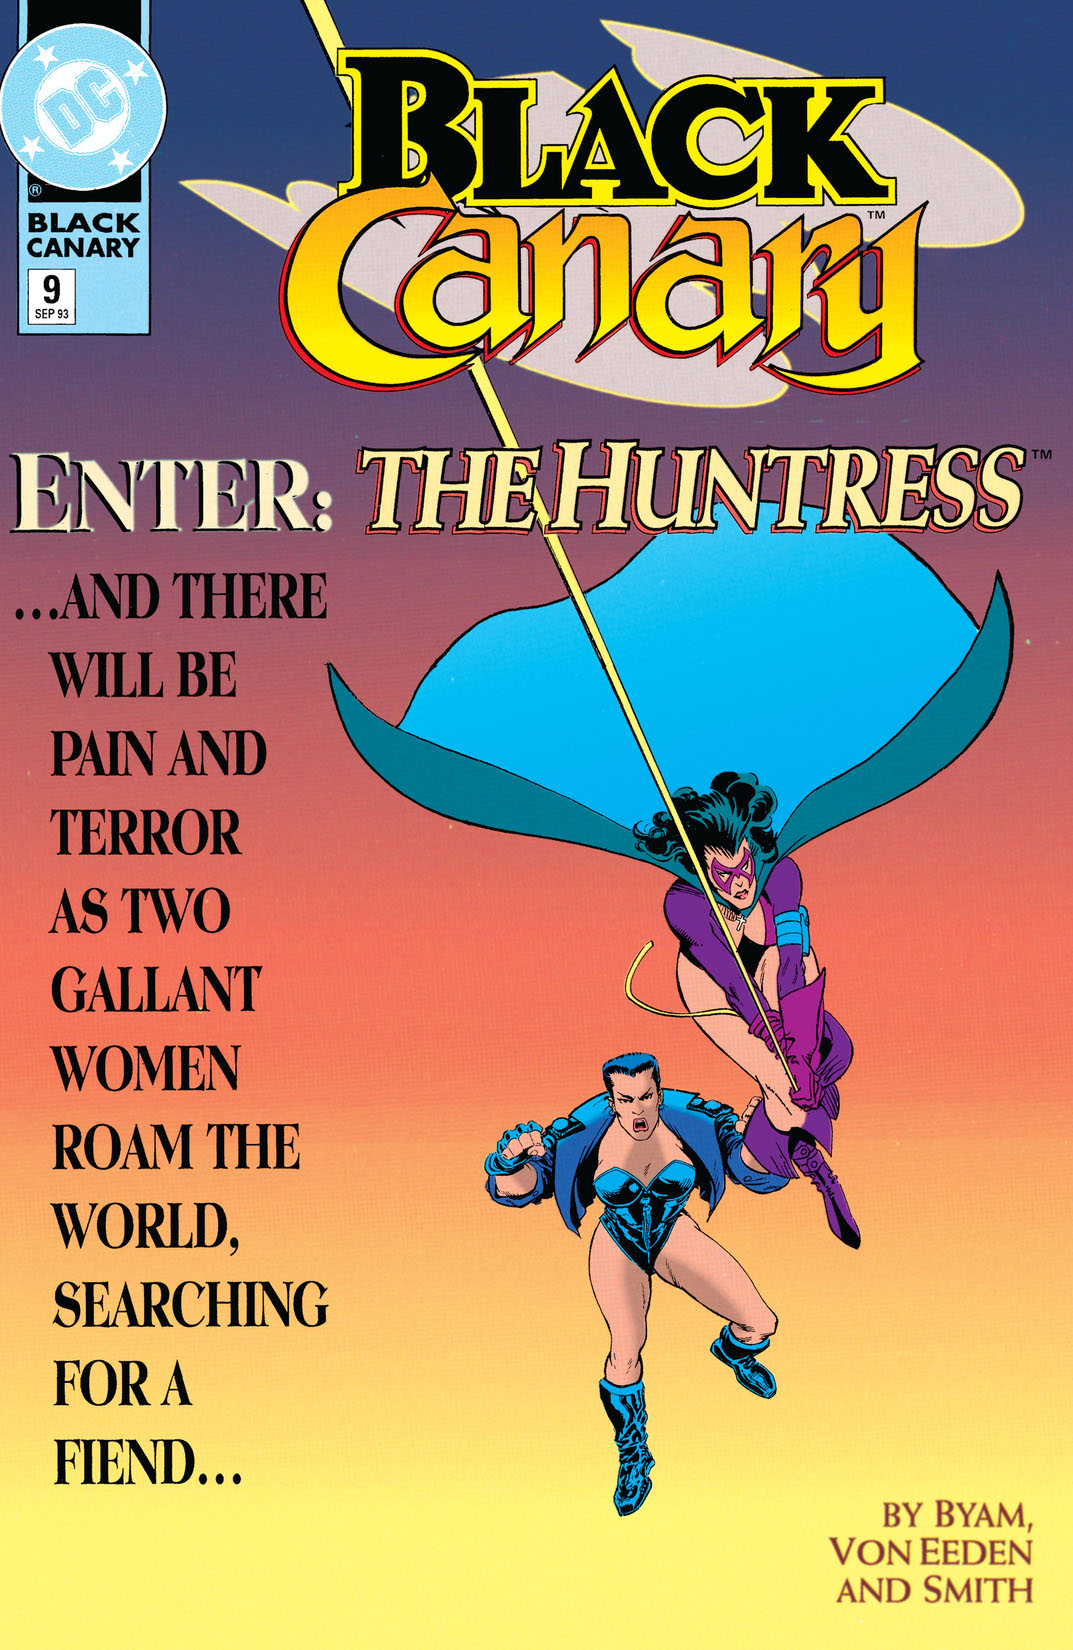 Black Canary (1992-) #9 preview images